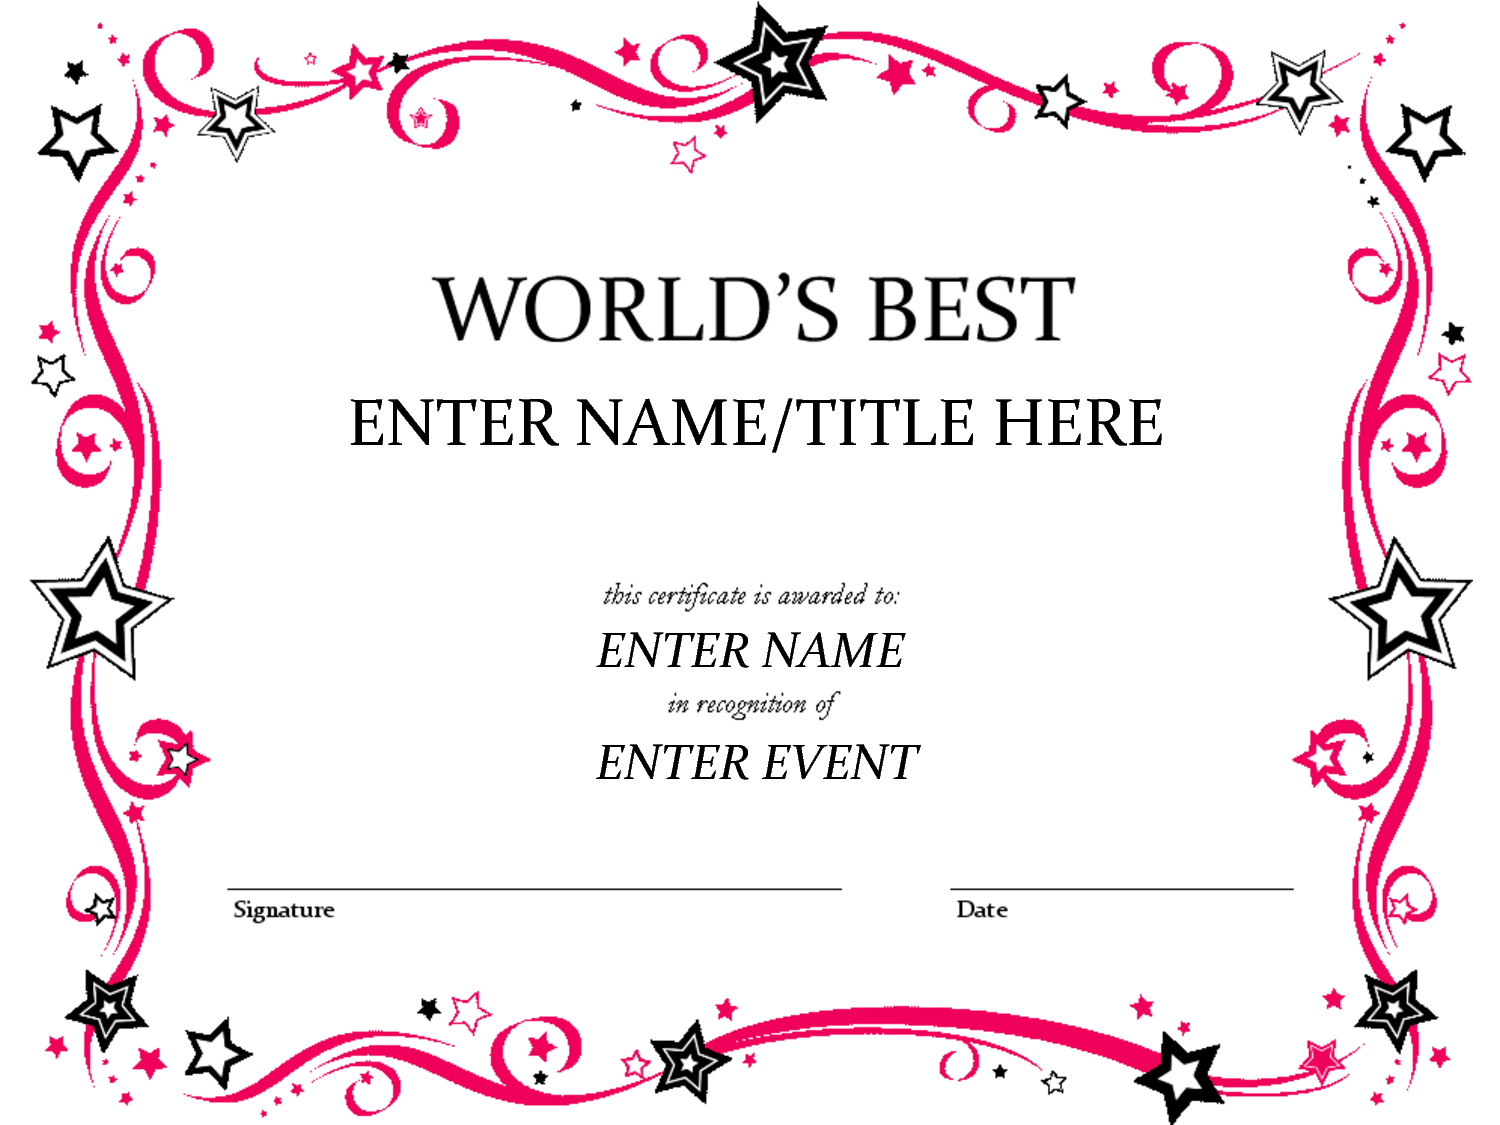 Free Funny Award Certificate Templates For Word Cumed In Downloadable Certificate Templates For Microsoft Word